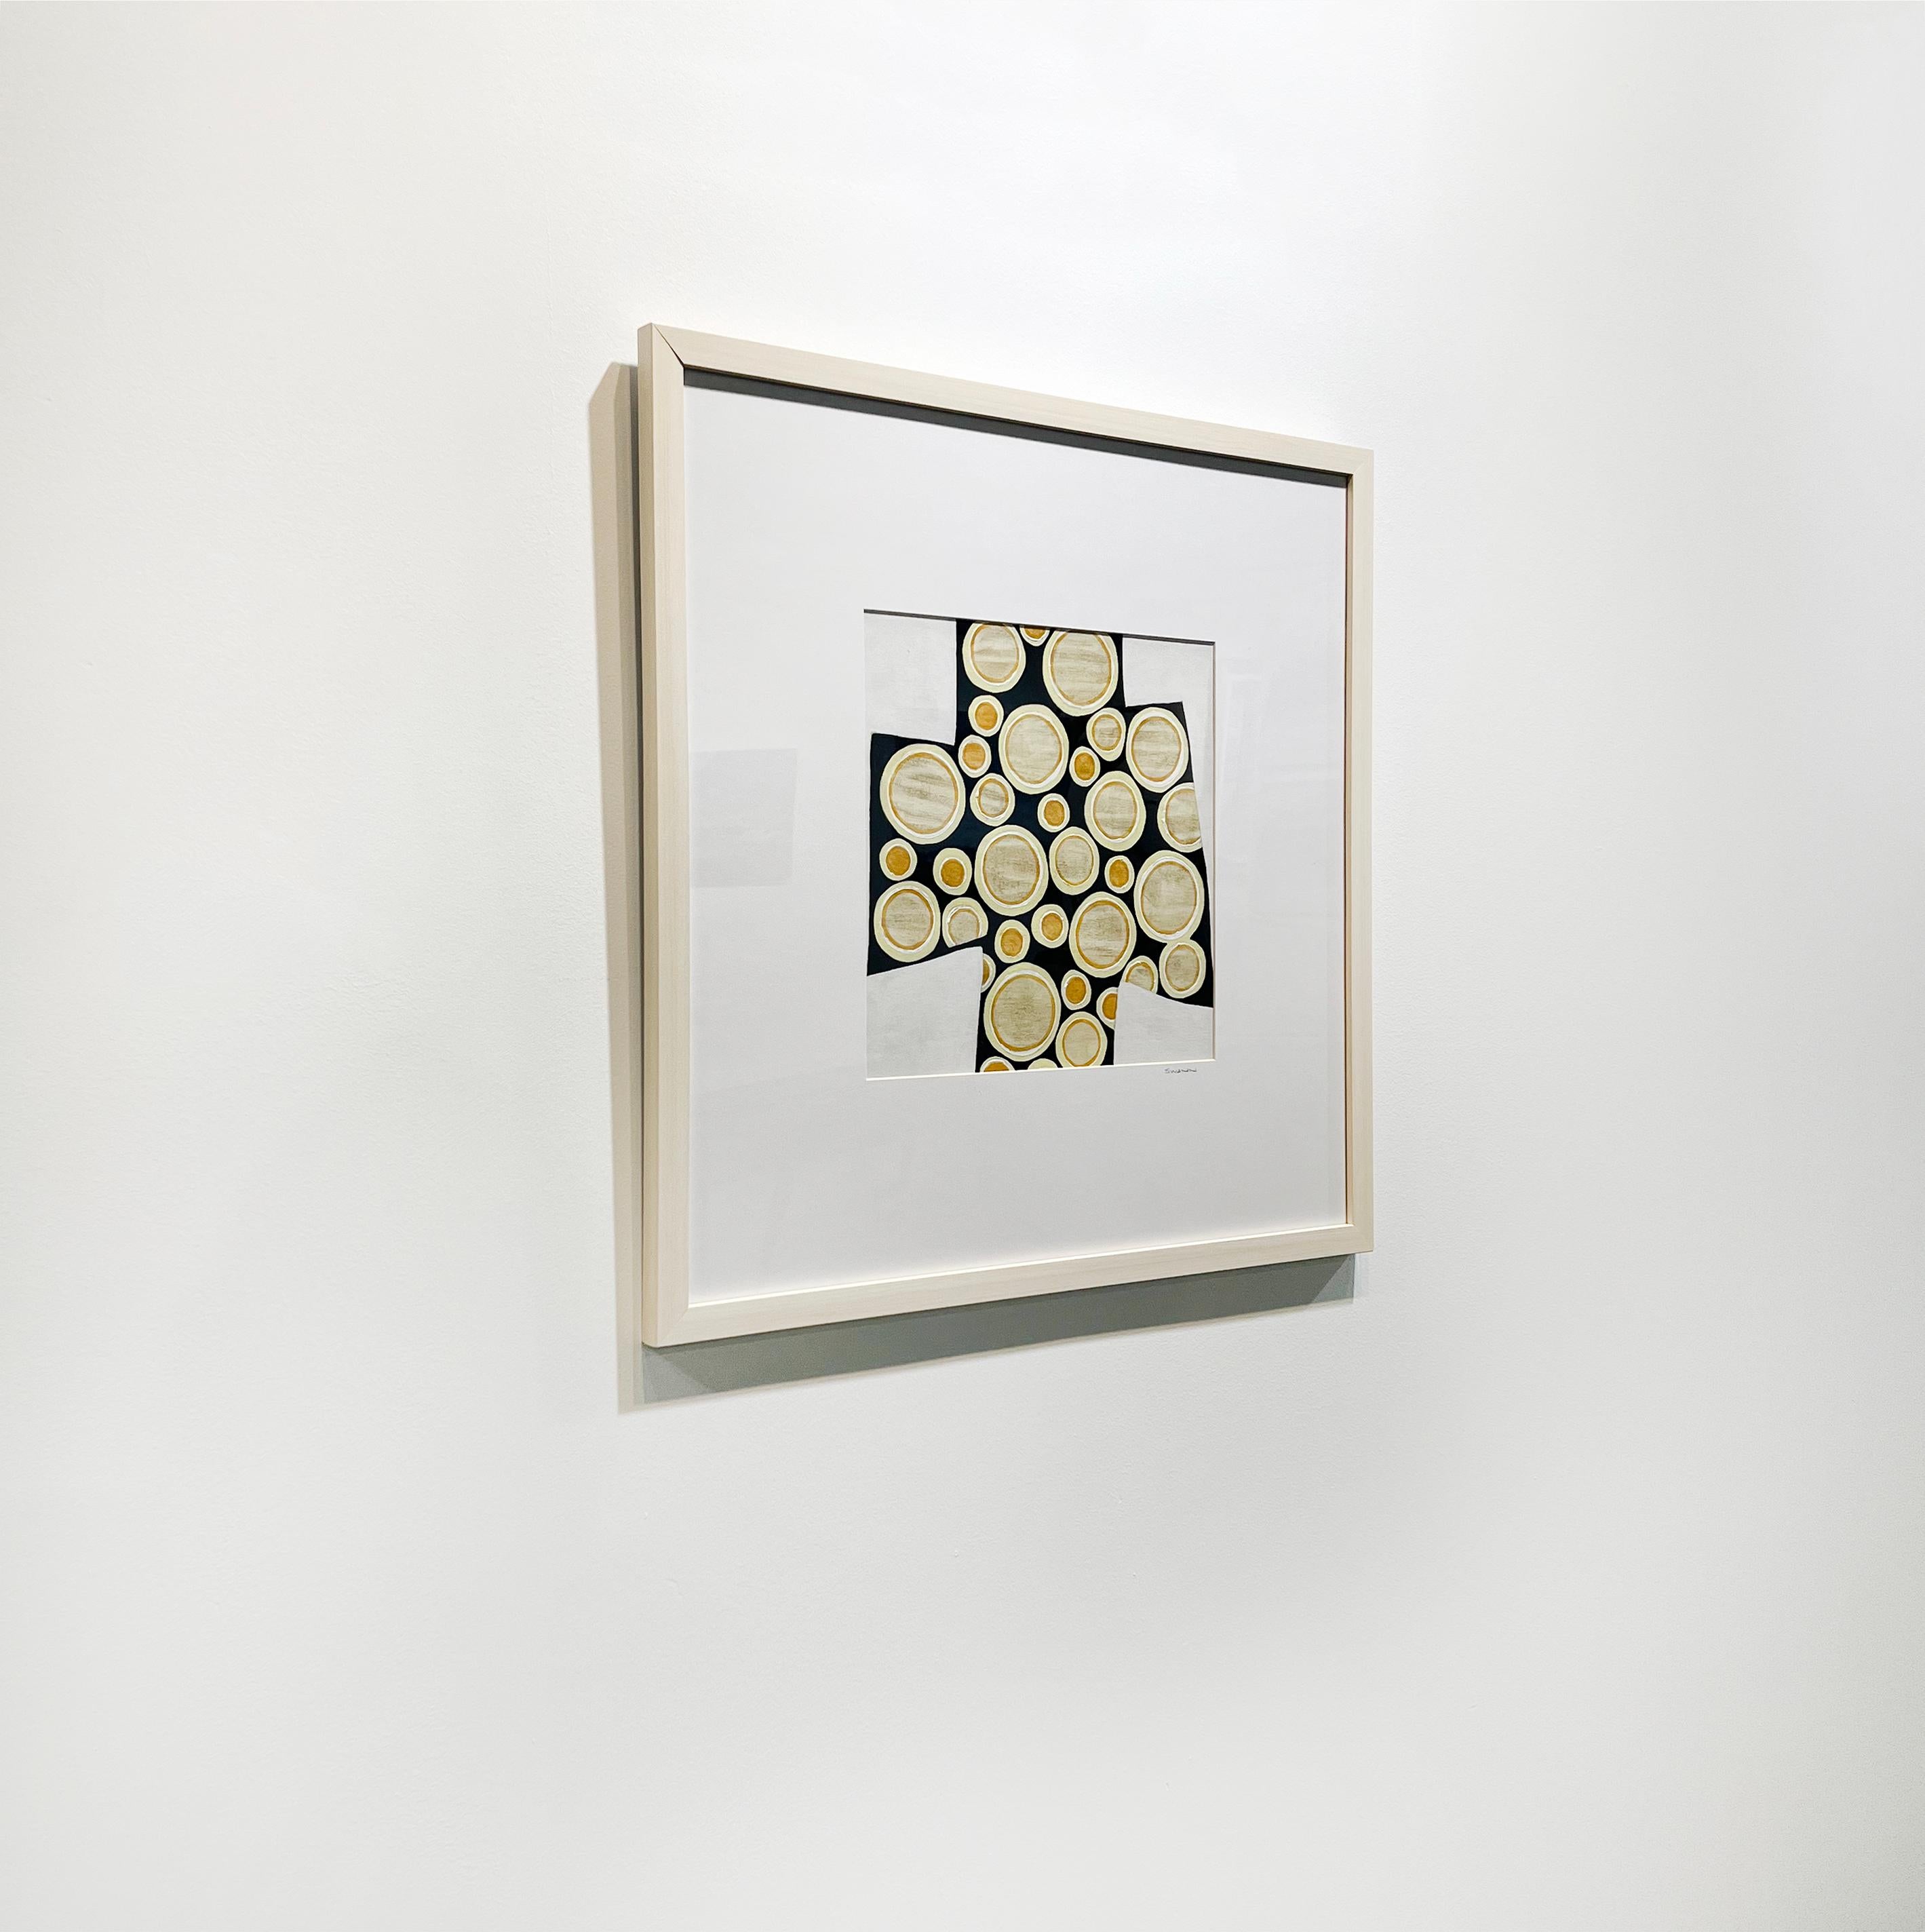 This painting is made with acrylic paint and Persian tea on paper, and is matted and framed in an off-white natural frame. The piece itself is 12